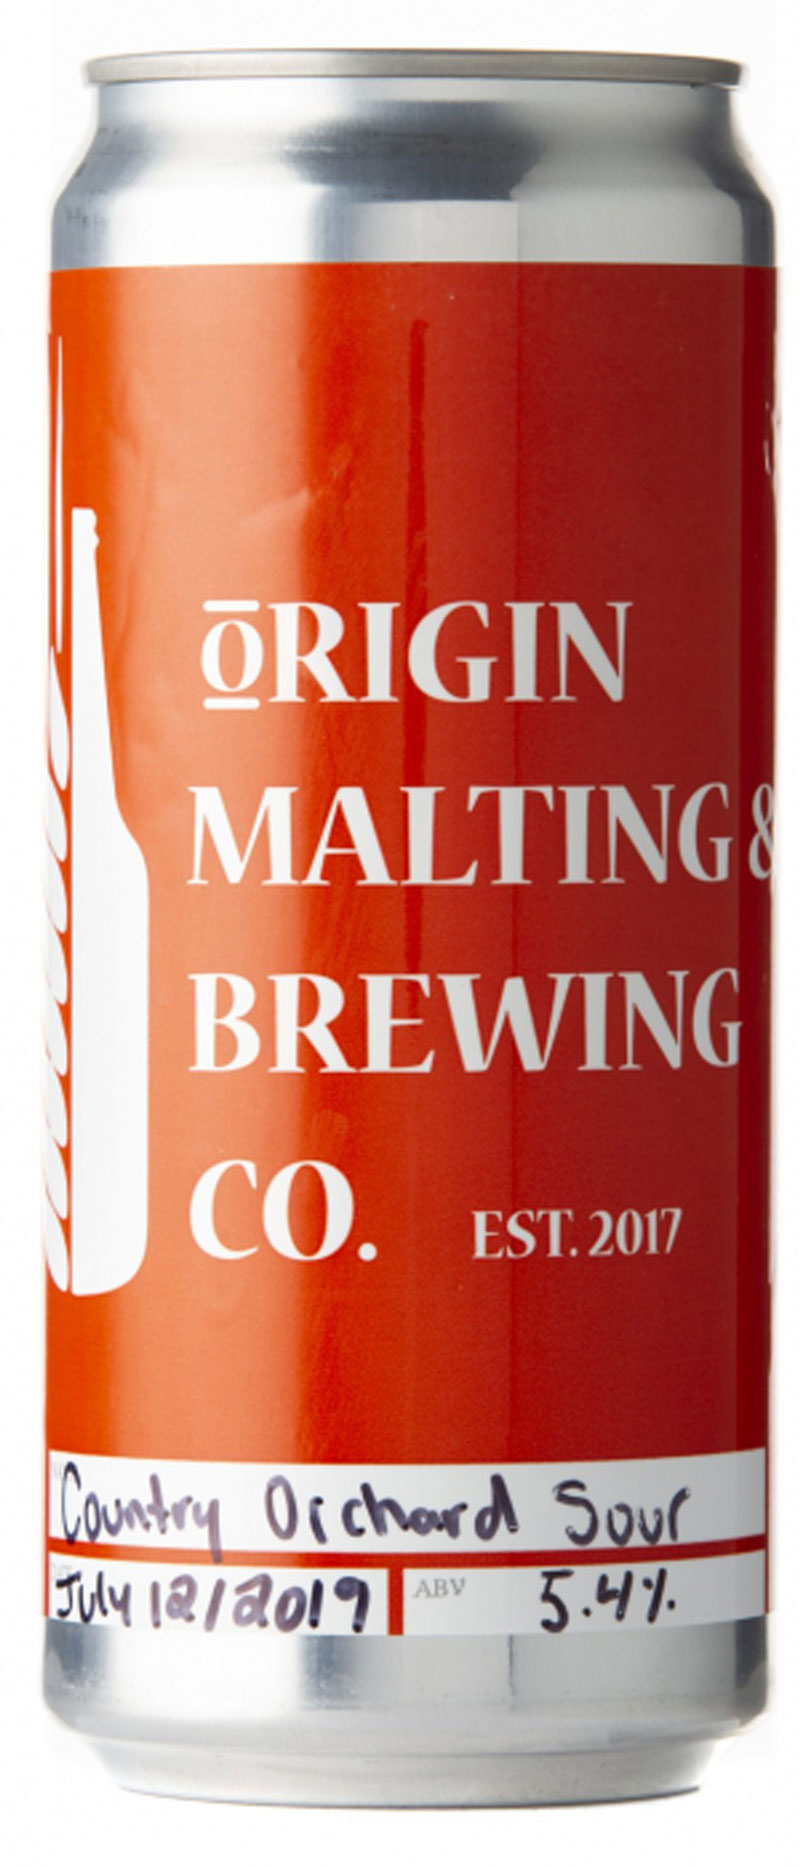 country-orchard-sour-american-wild-sour-ale-origin-malting-brewing-co_1582324595